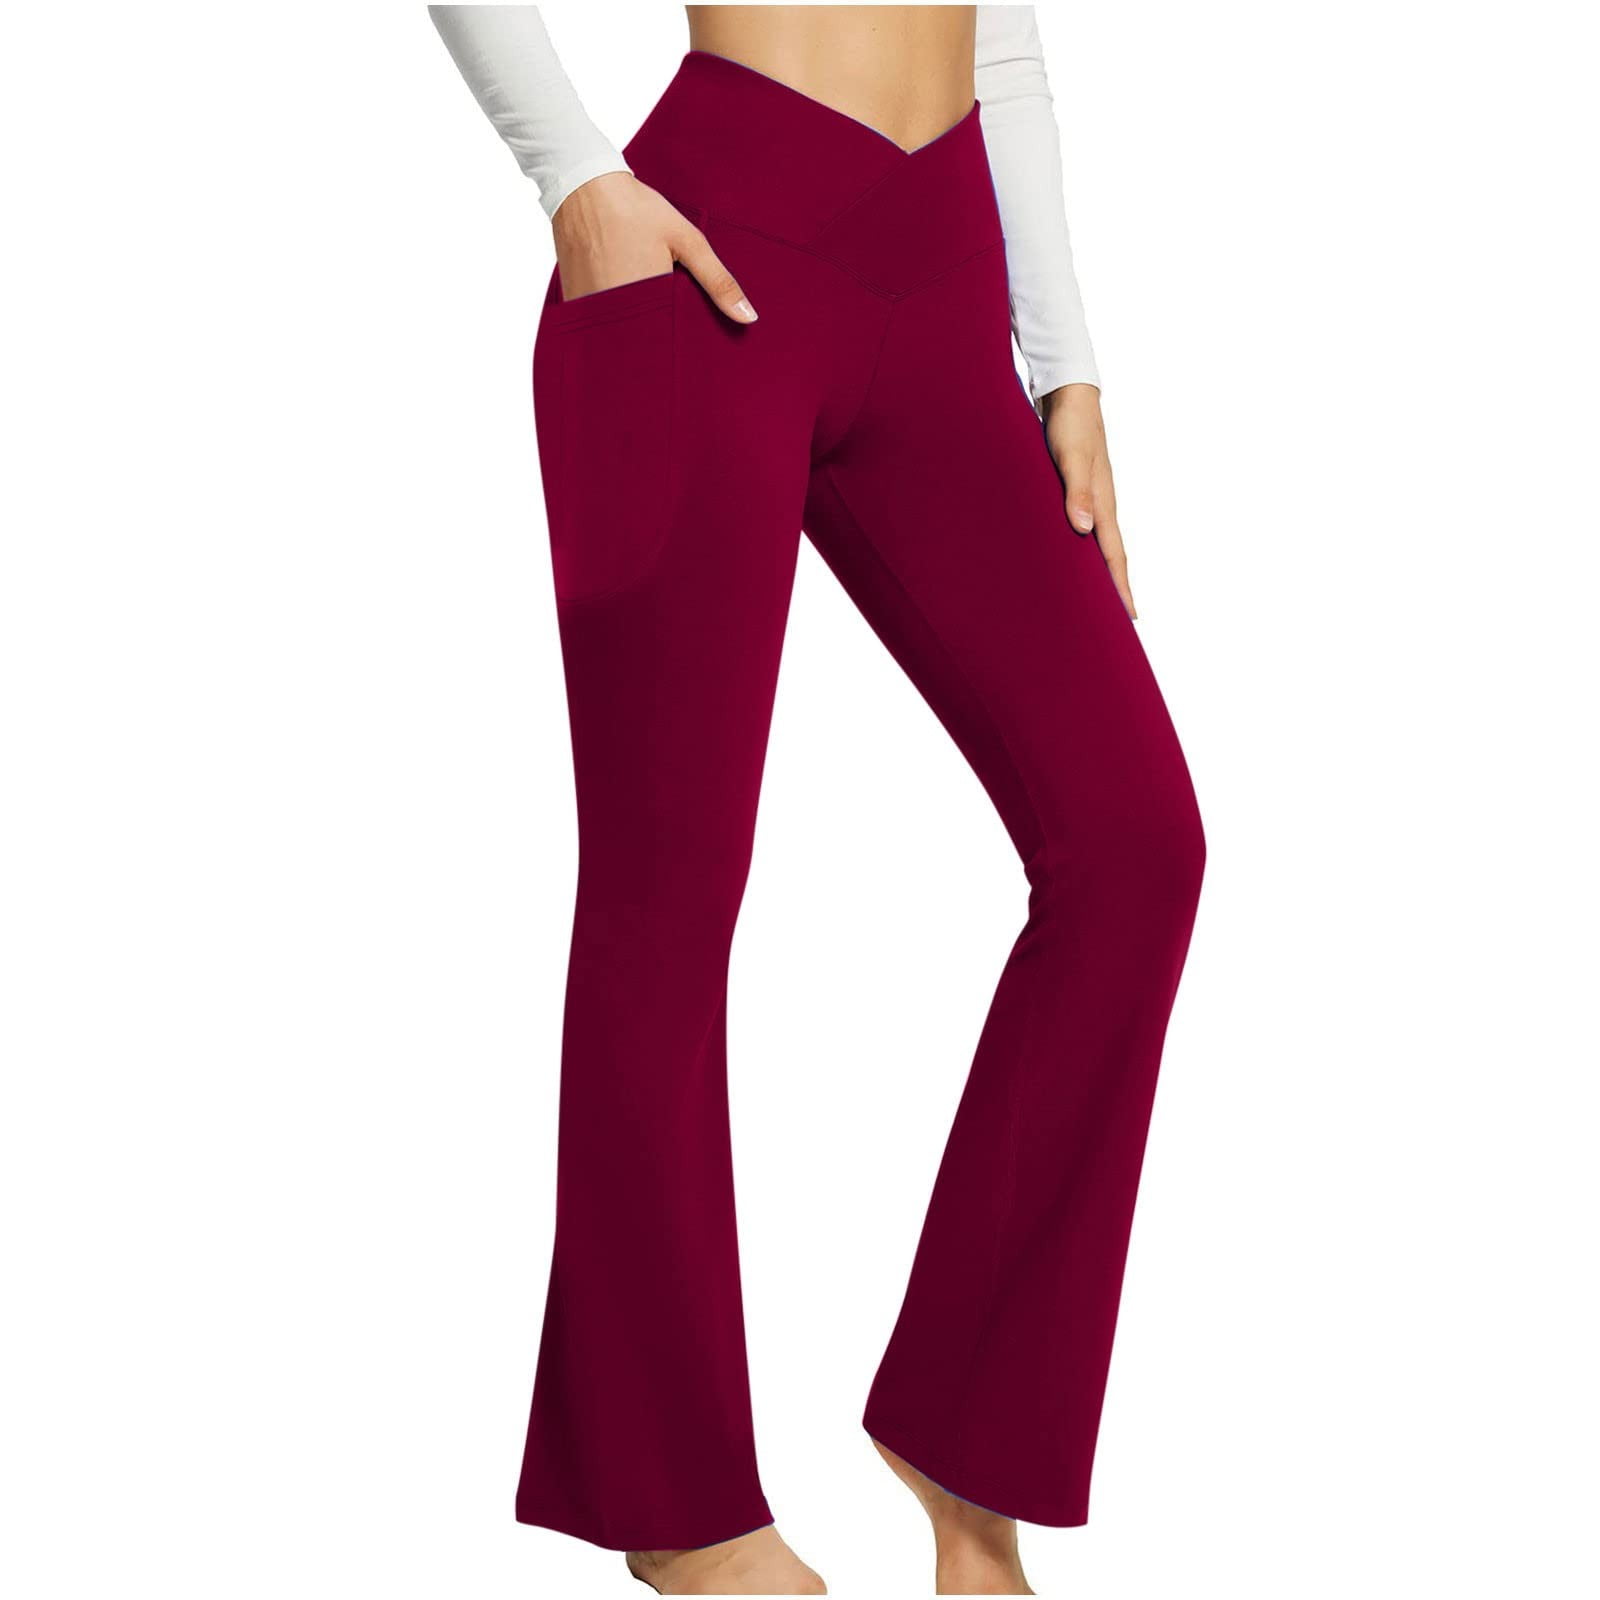 Qcmgmg Womens Flare Yoga Pants with Pockets Flared Leggings Comfy